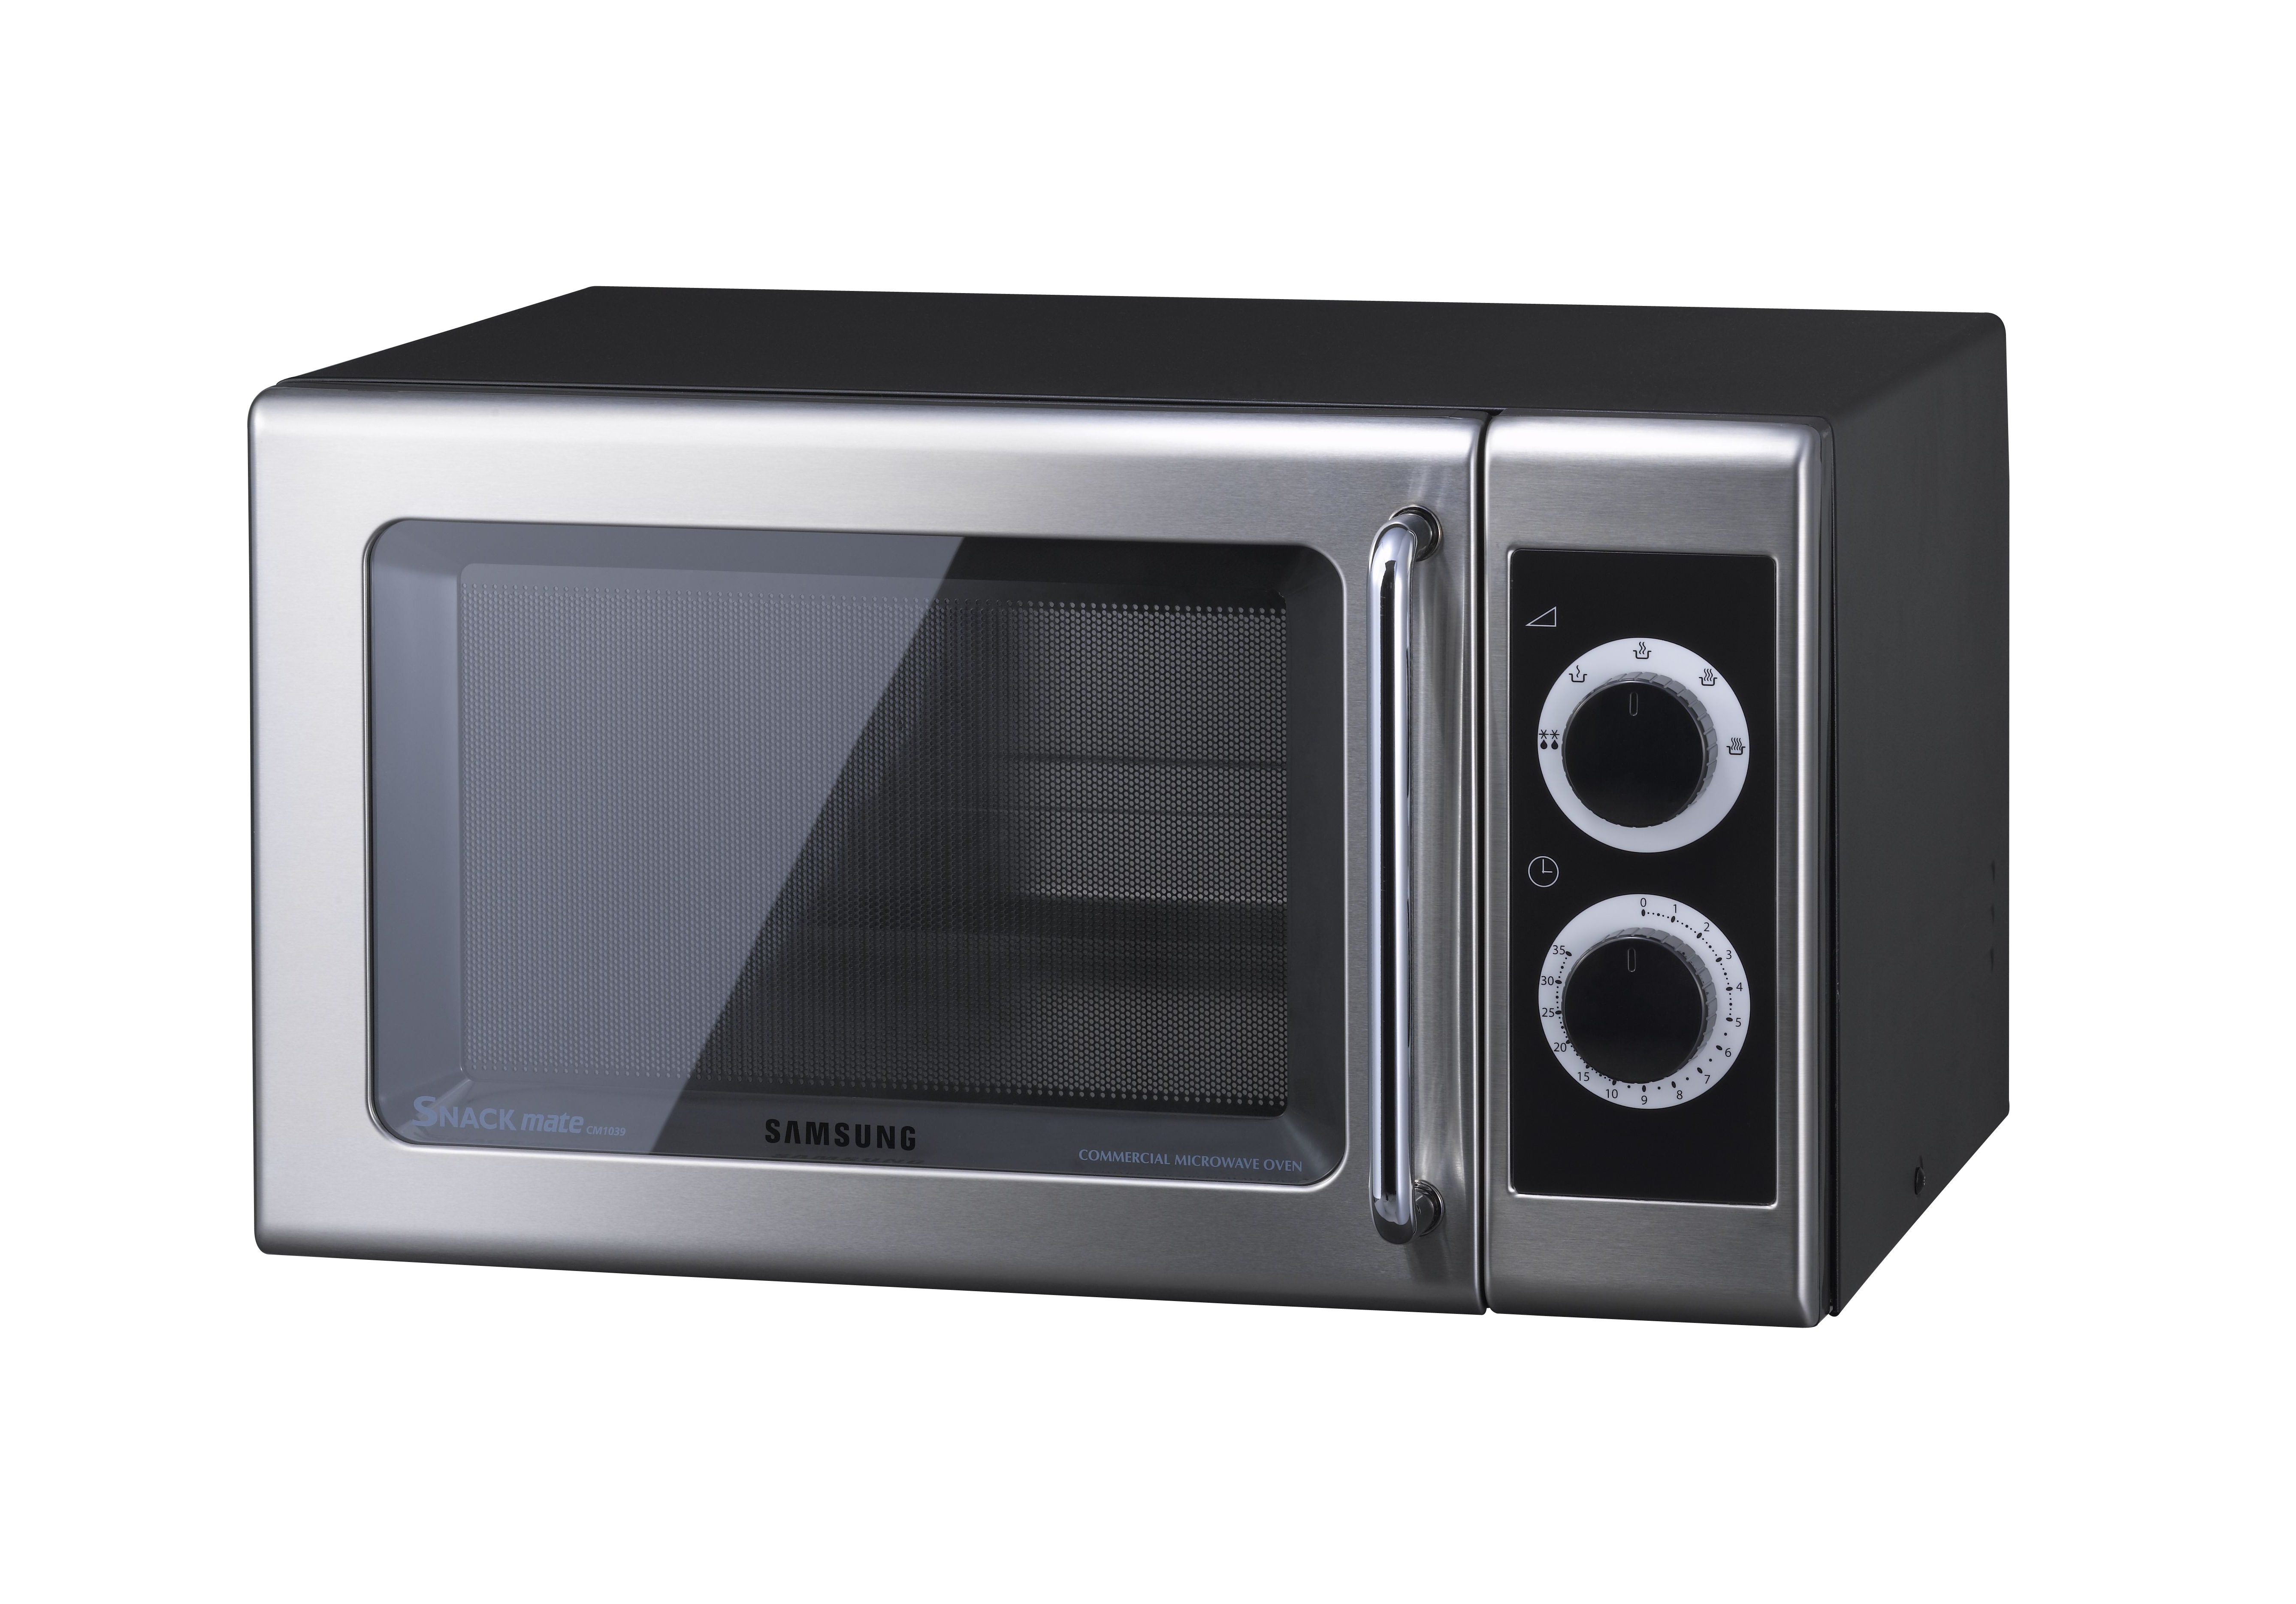 Apuro now supplies a Samsung semi-commercial 1000watt microwave oven - The Publicity Works